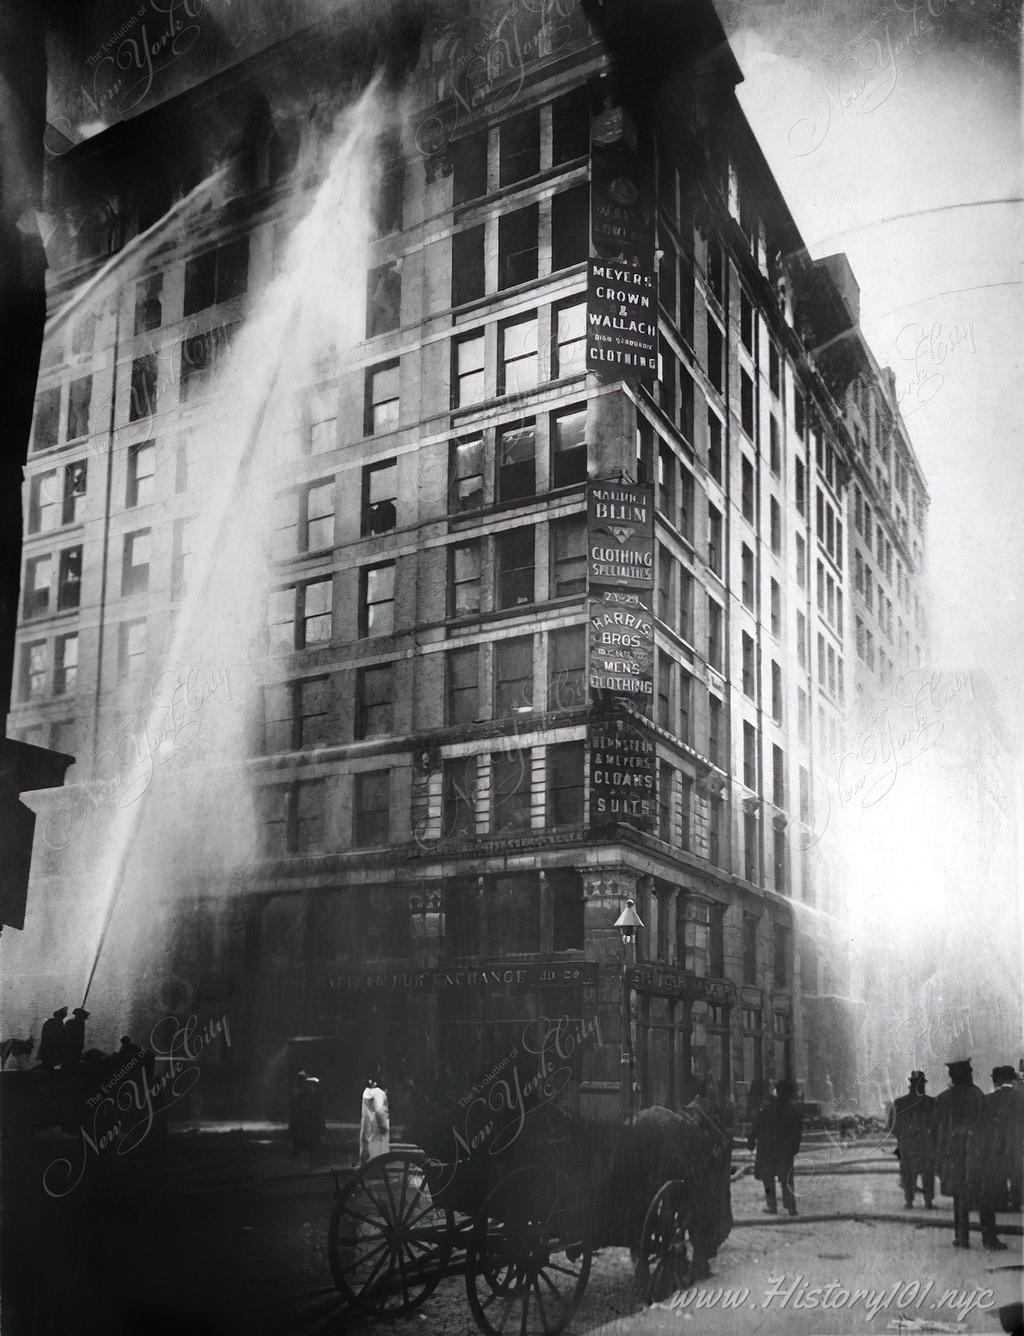 Photograph of firemen as they battle the fatal blaze which engulfed the Triangle Waist Company in flames, claiming 146 lives.